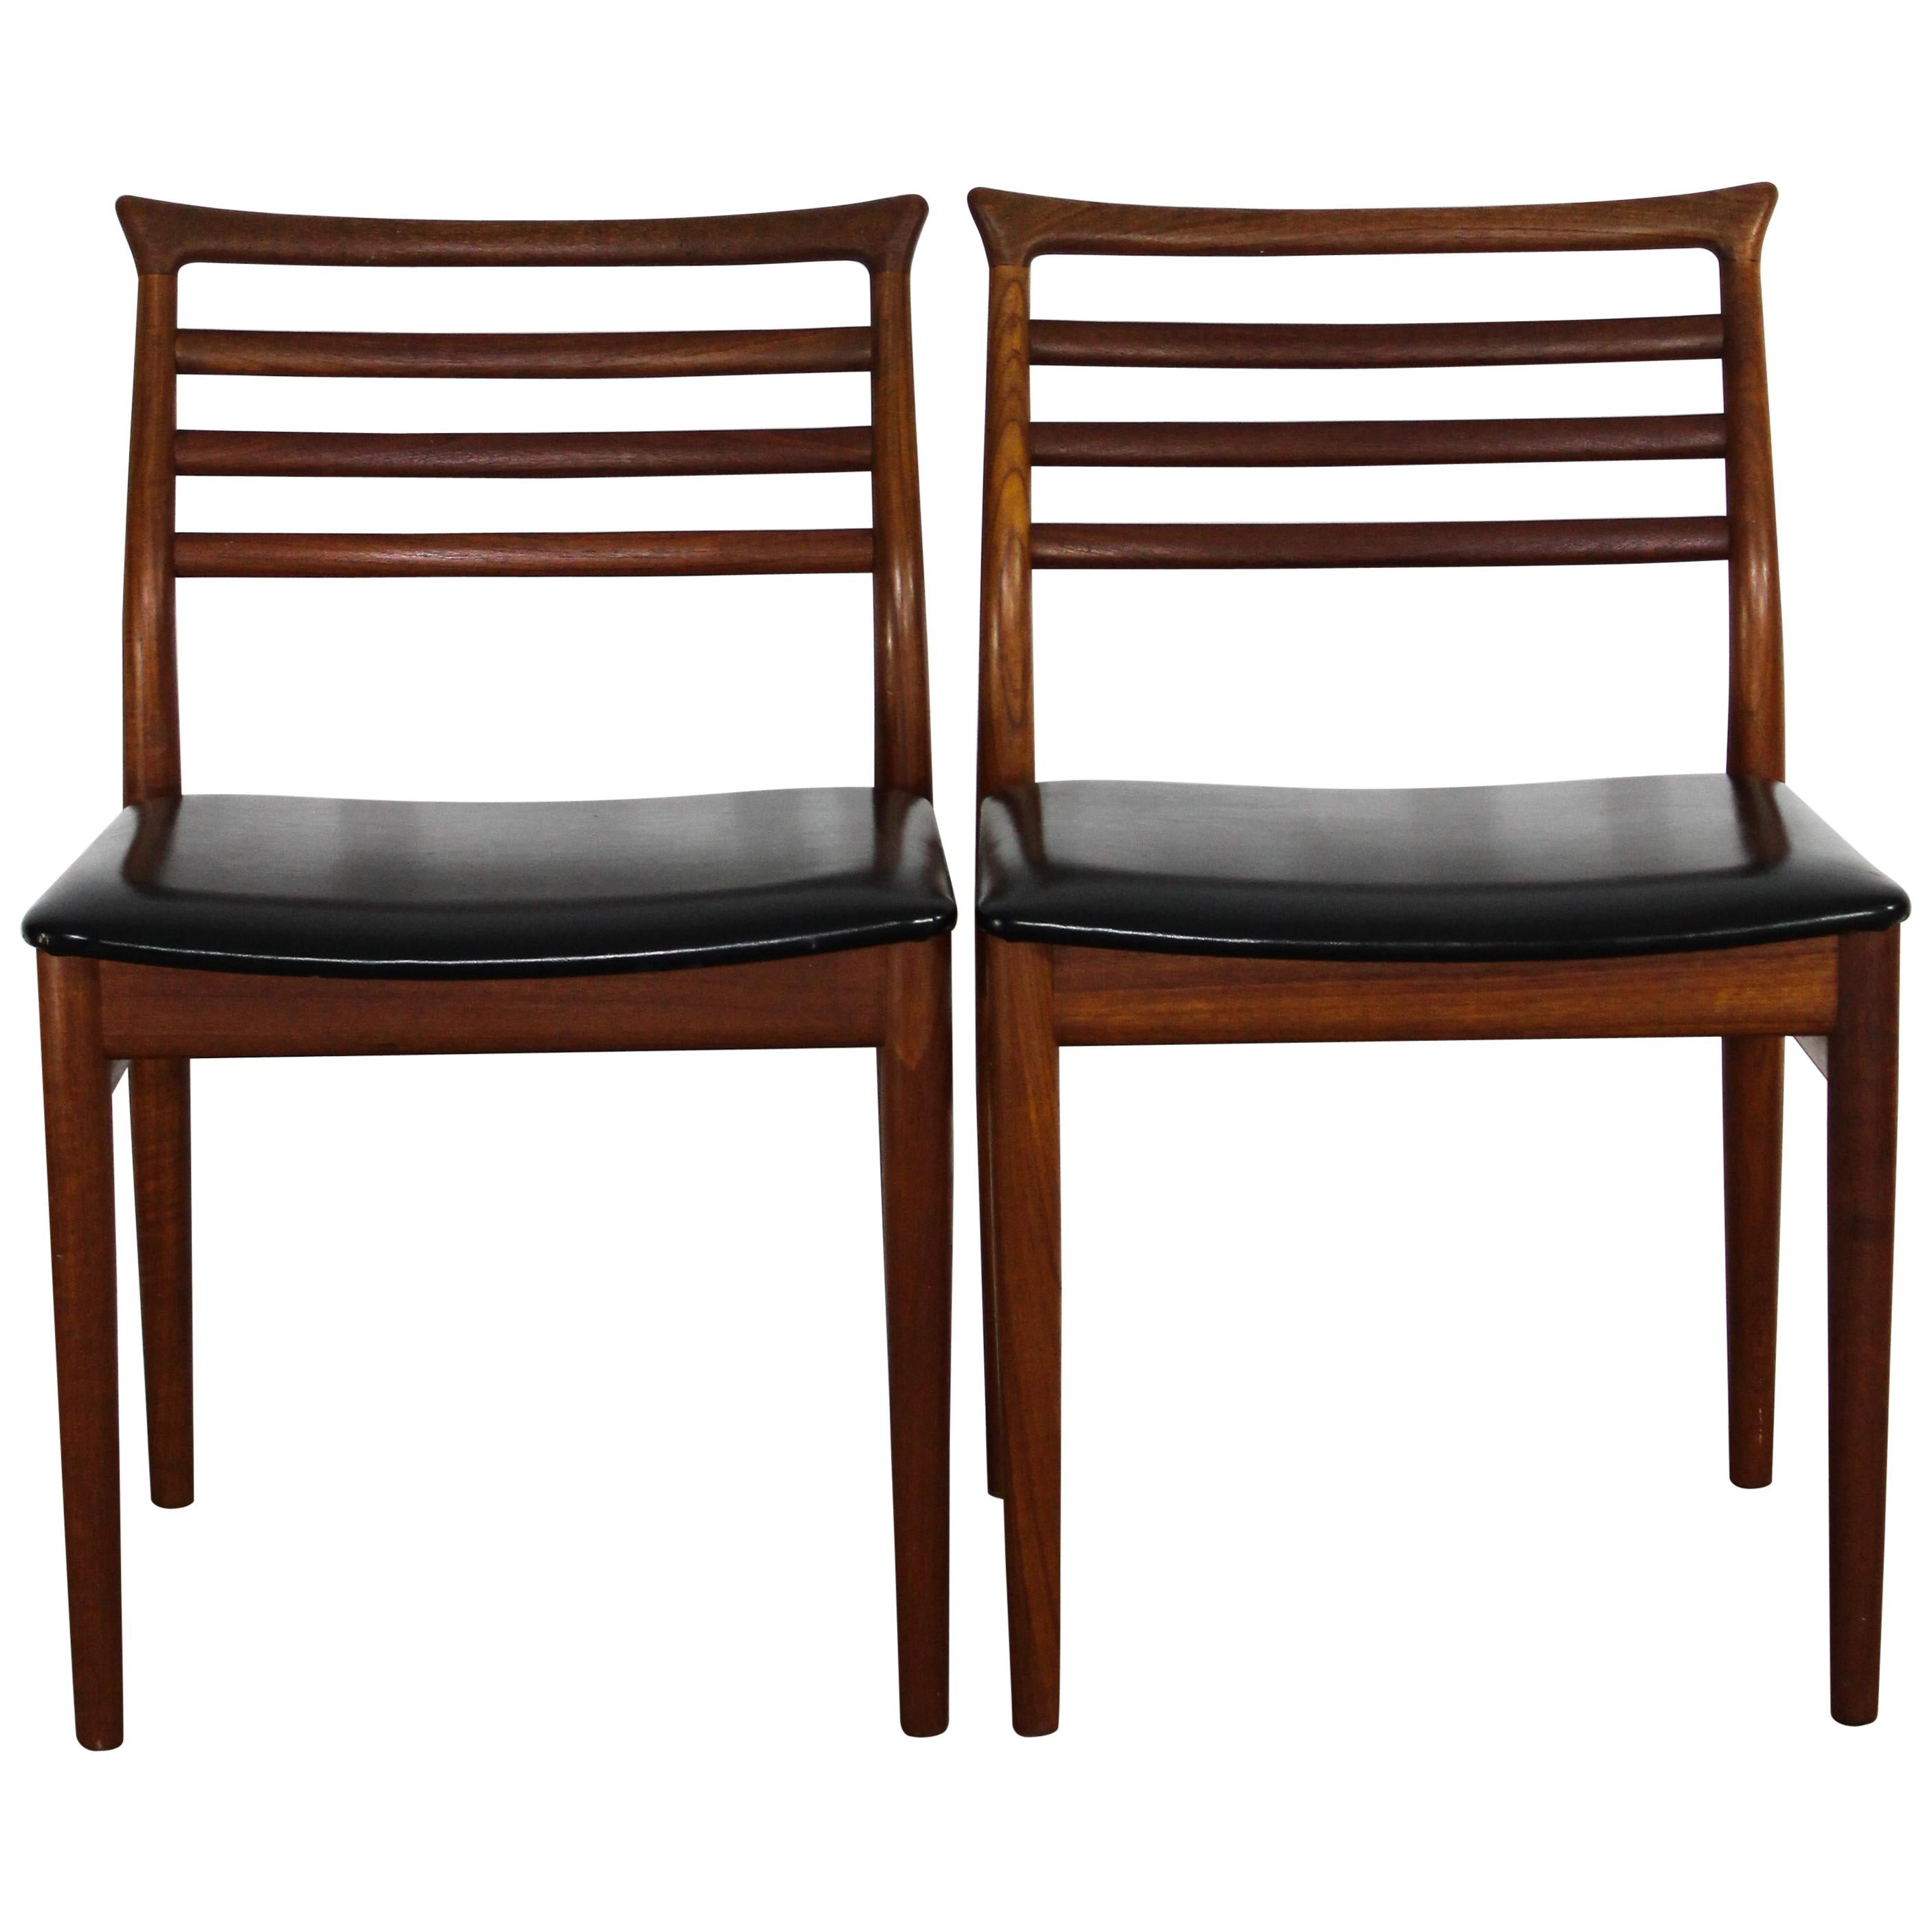 Midcentury Danish Erling Torvits Teak Dining Chairs, 2 Available